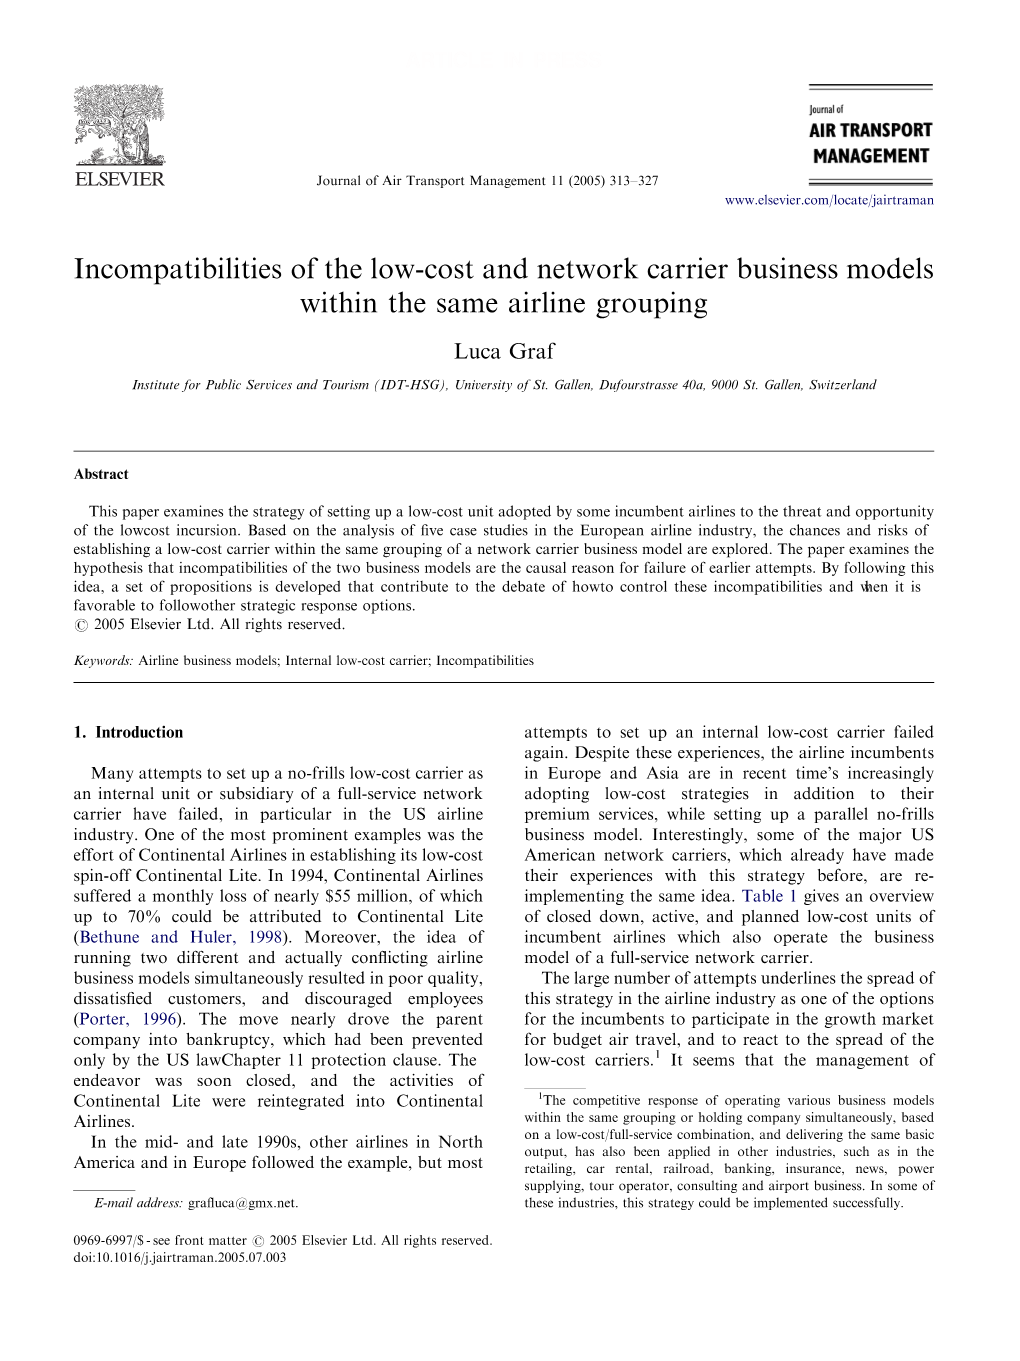 Incompatibilities of the Low-Cost and Network Carrier Business Models Within the Same Airline Grouping